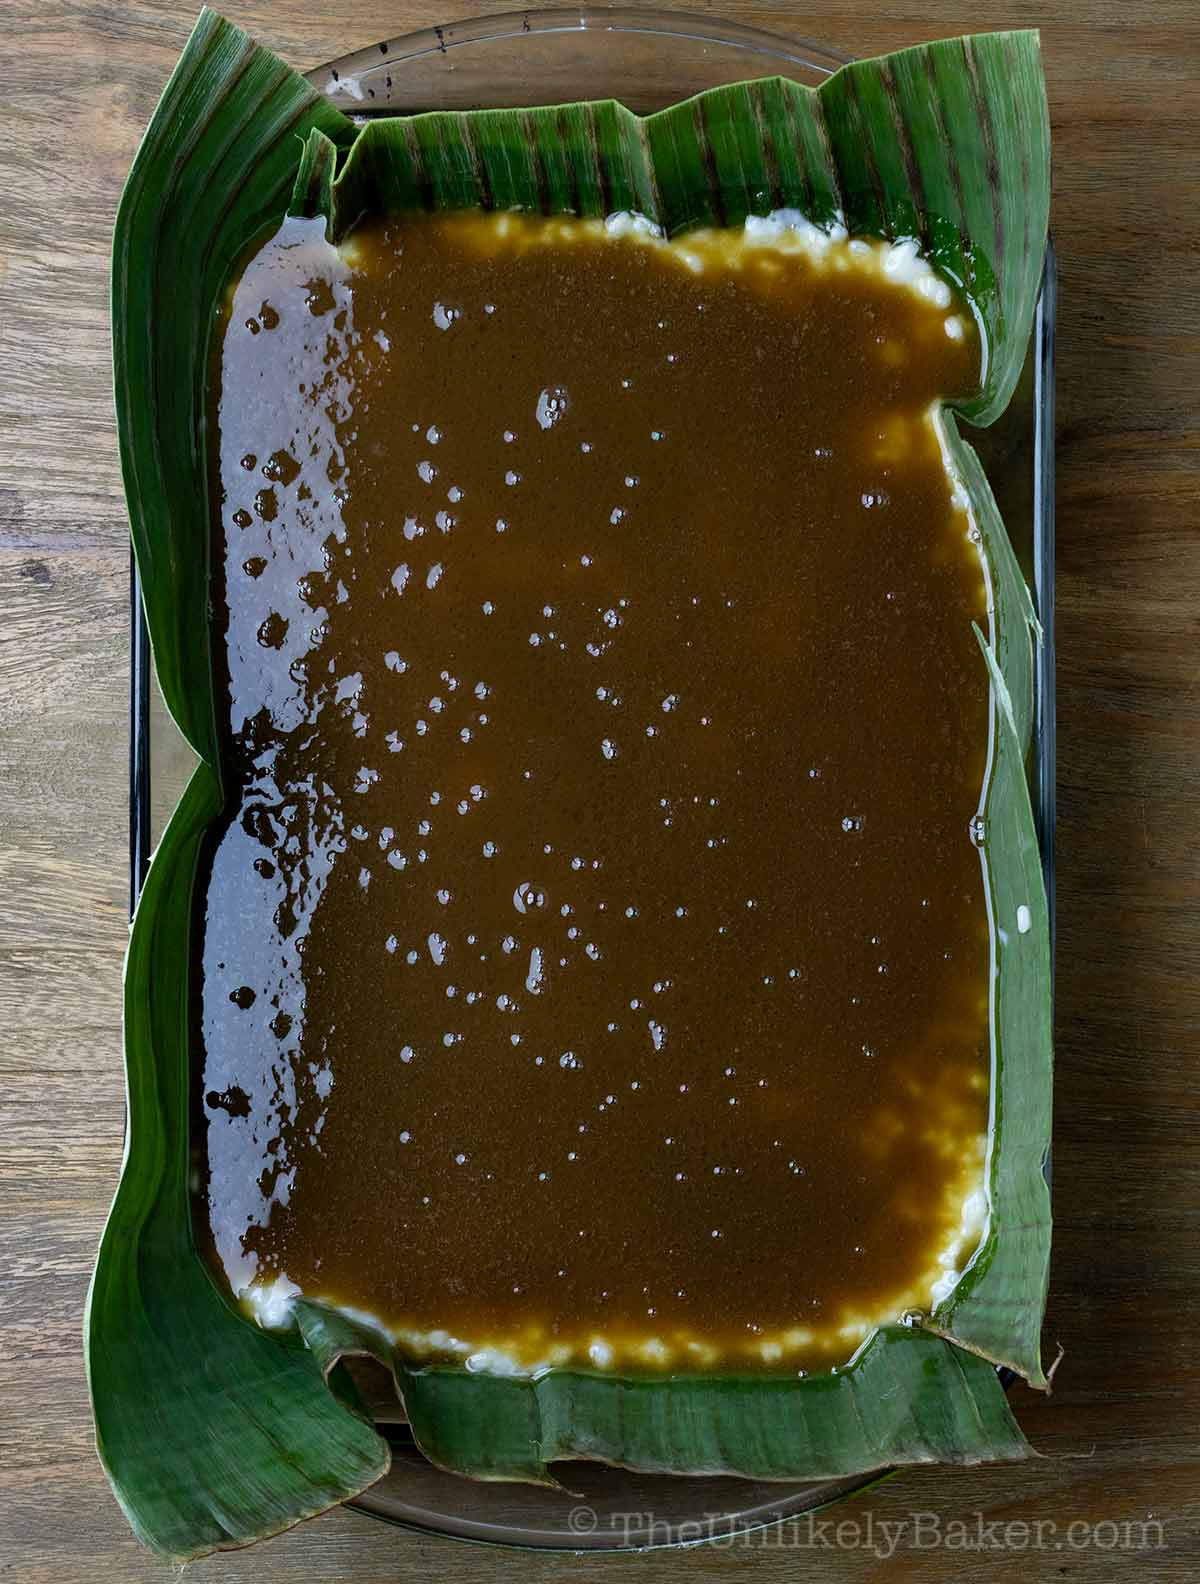 Caramel coconut topping on top of cooked rice.